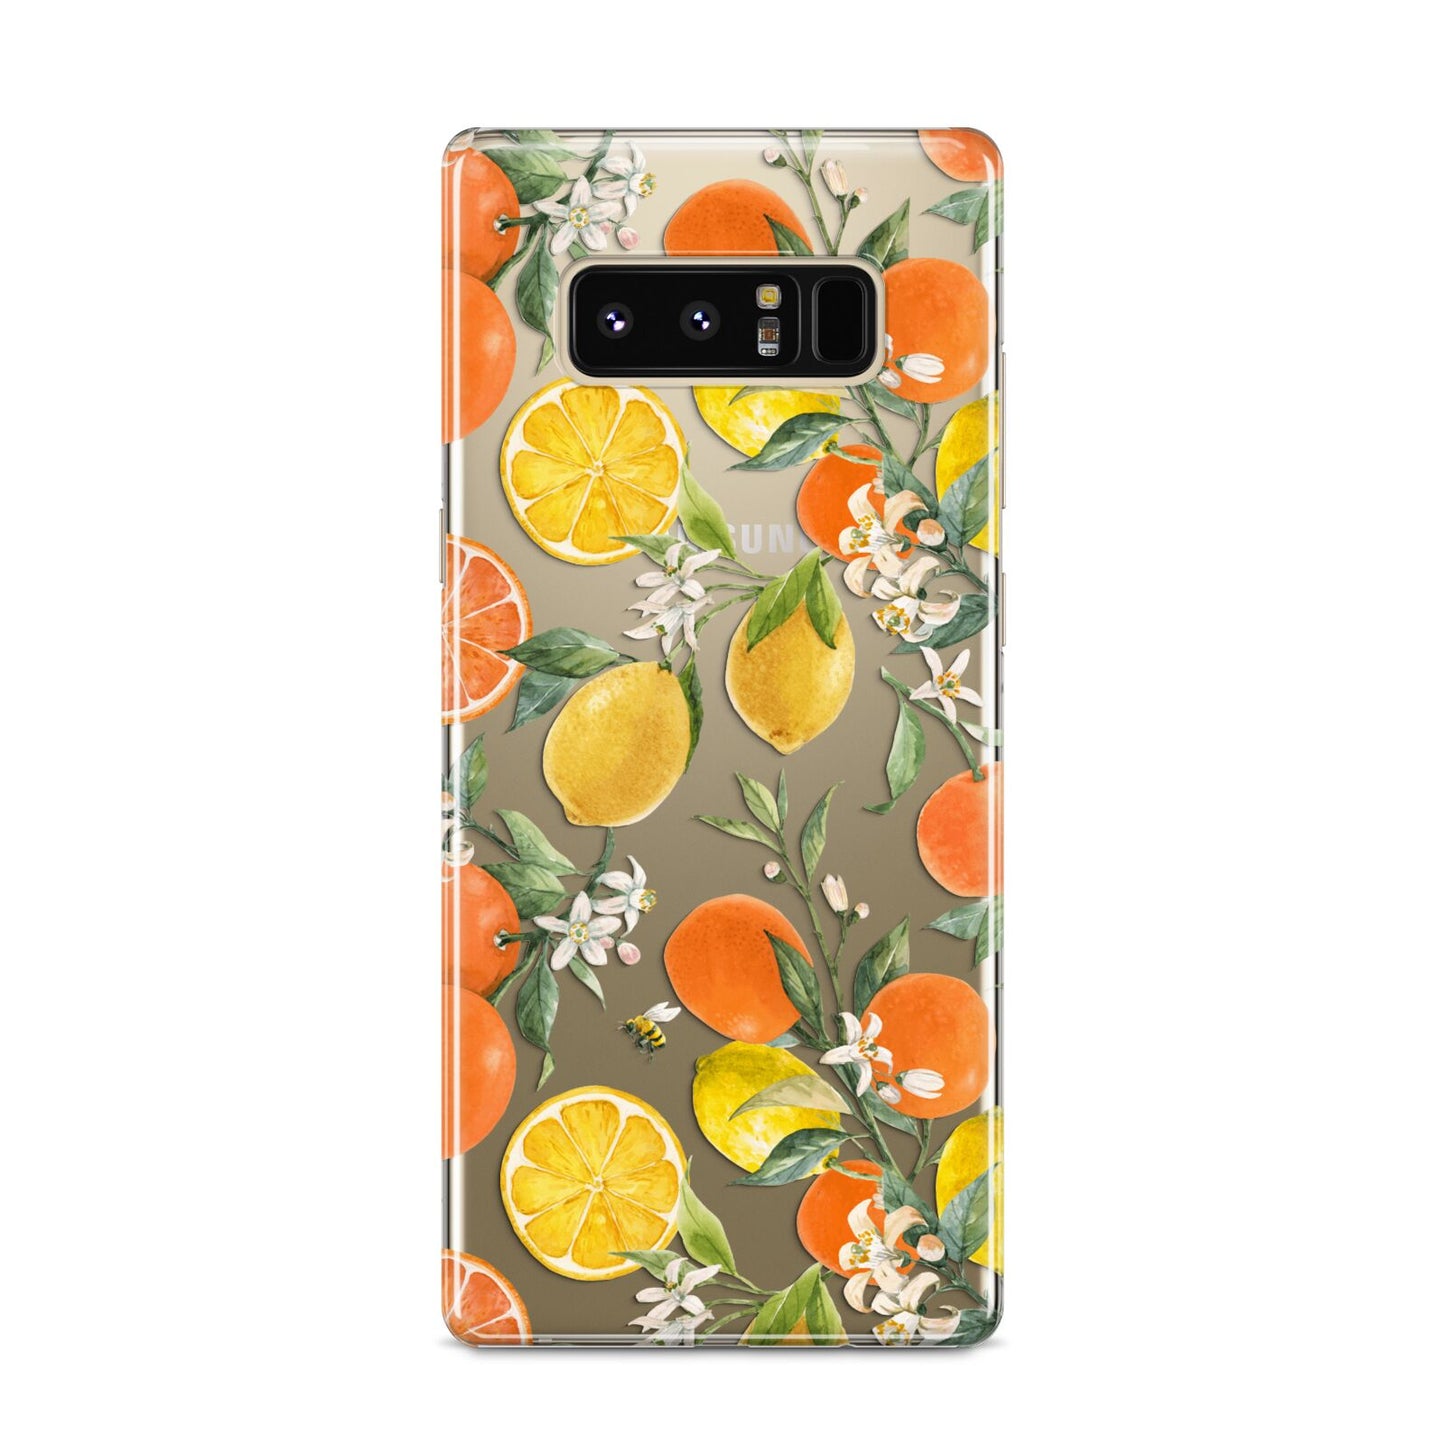 Lemons and Oranges Samsung Galaxy S8 Case